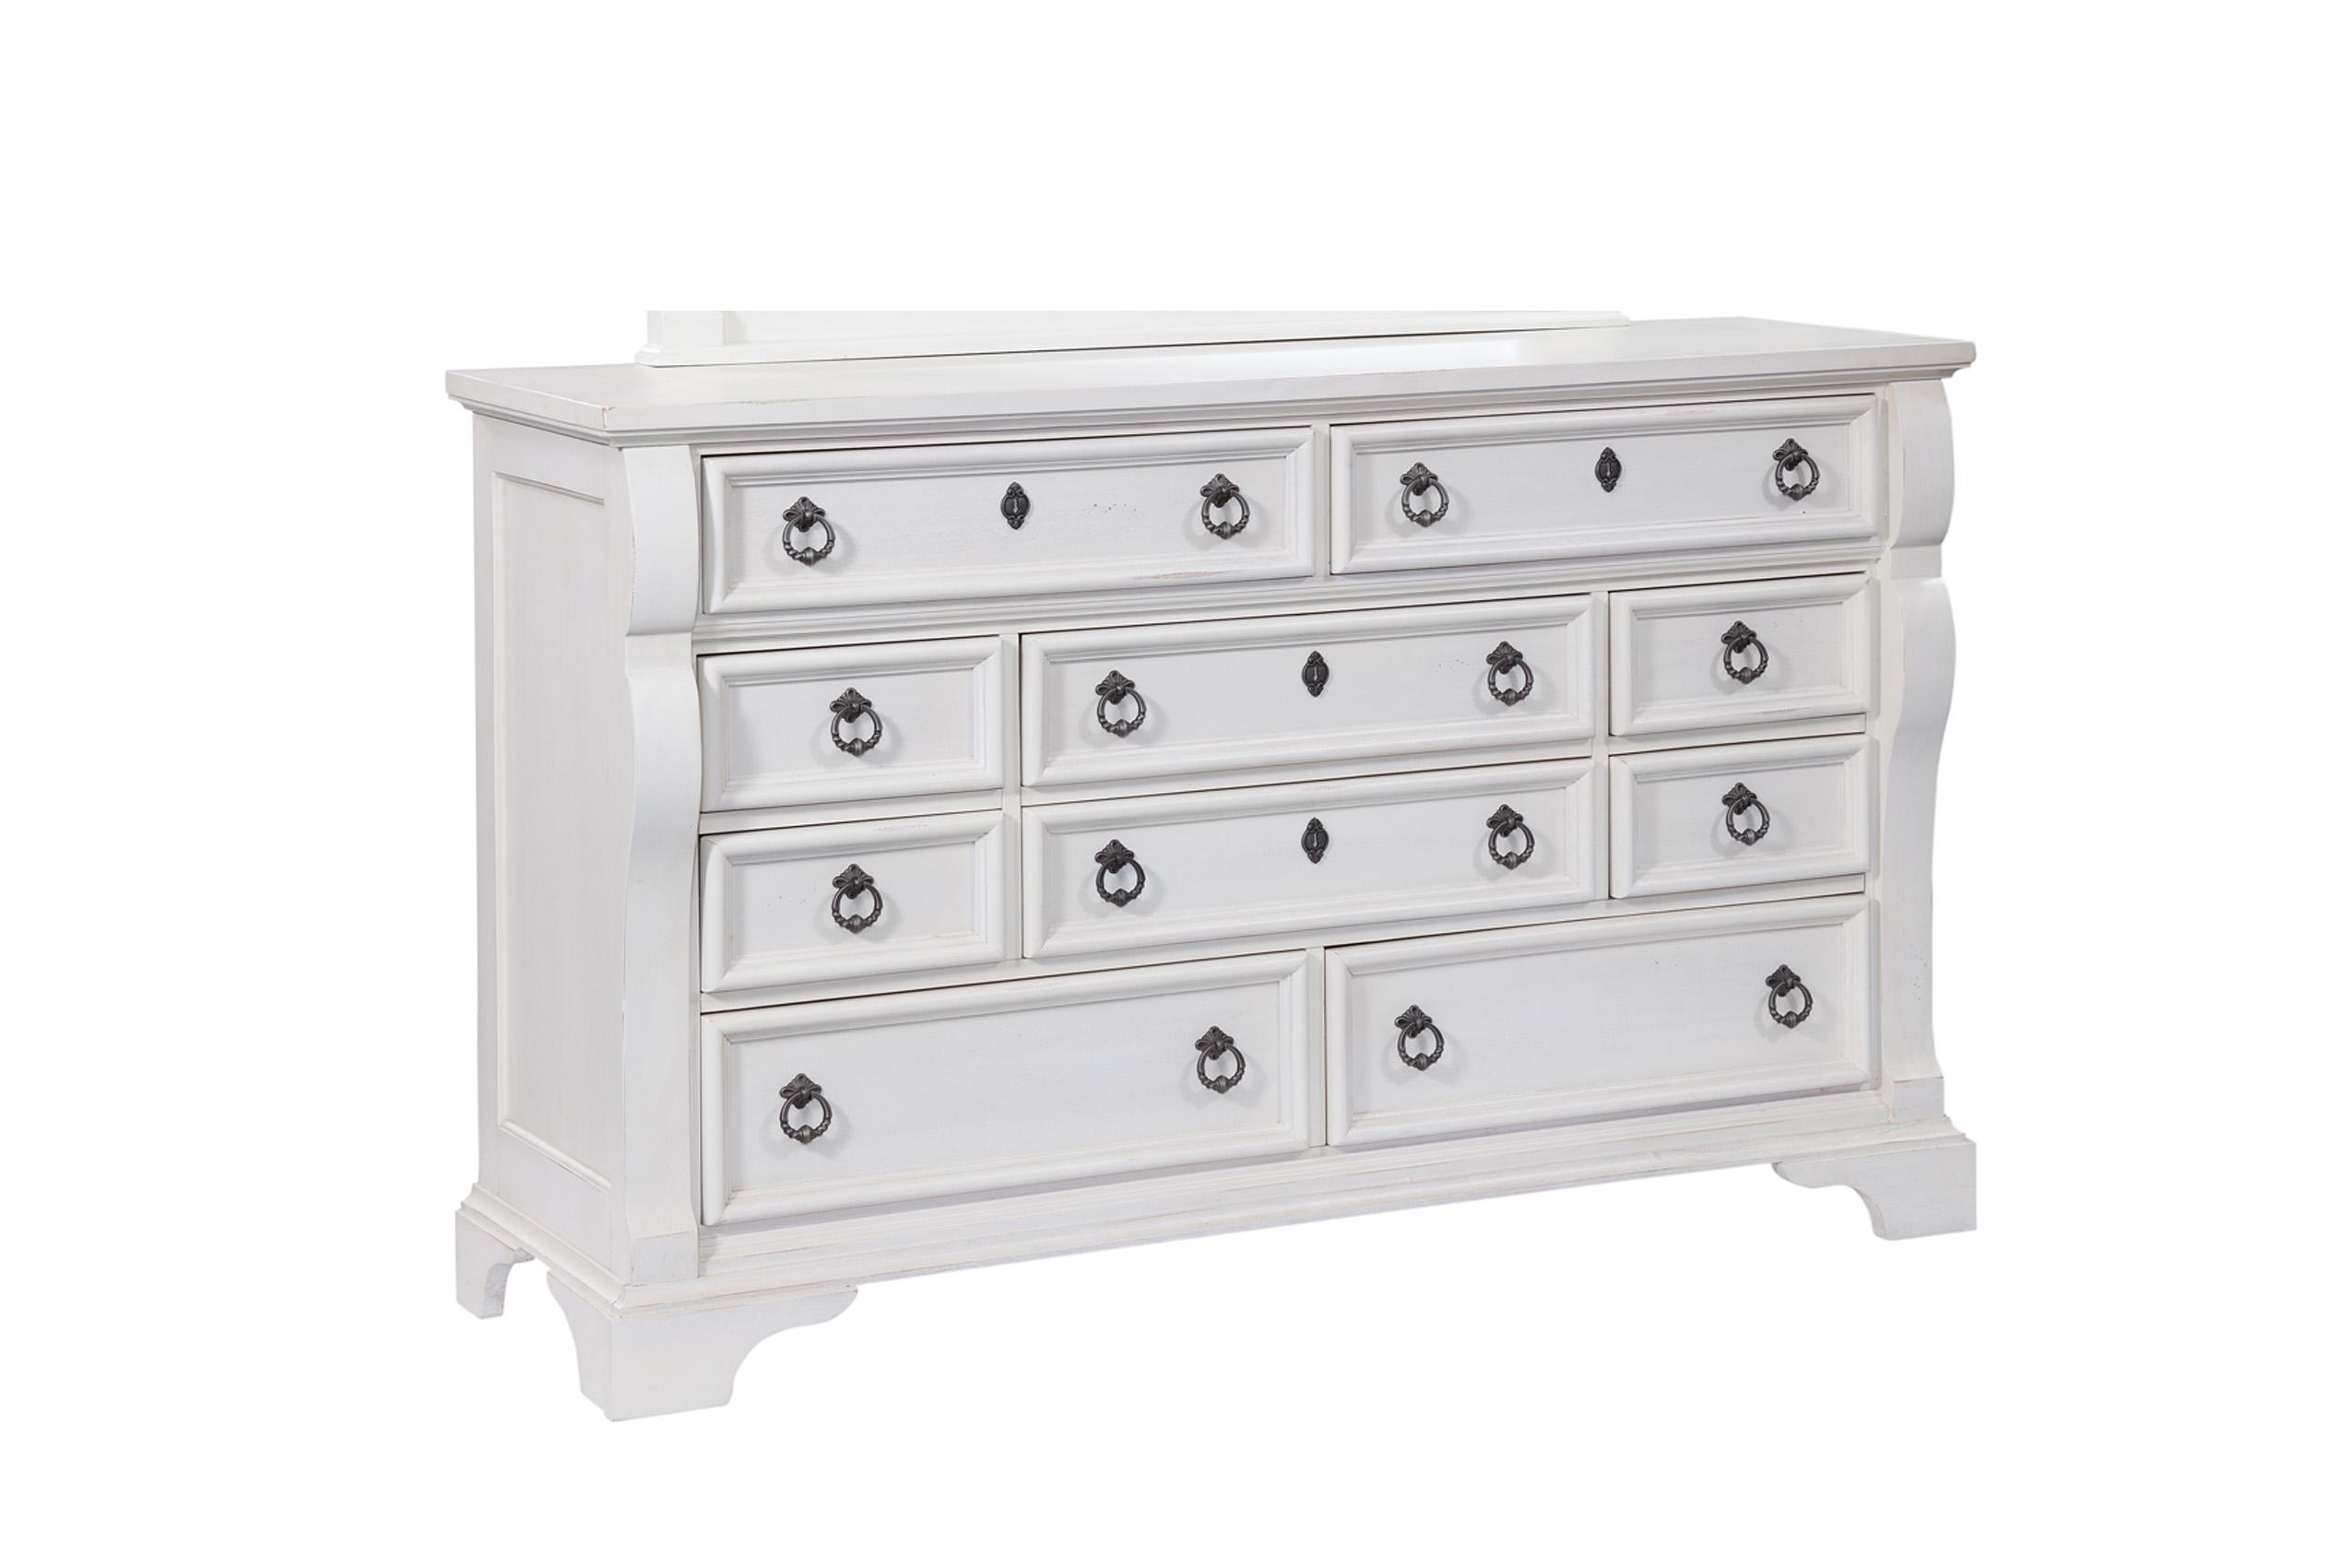 Classic, Traditional, Cottage Dresser HEIRLOOM 2910-210 2910-210 in White 